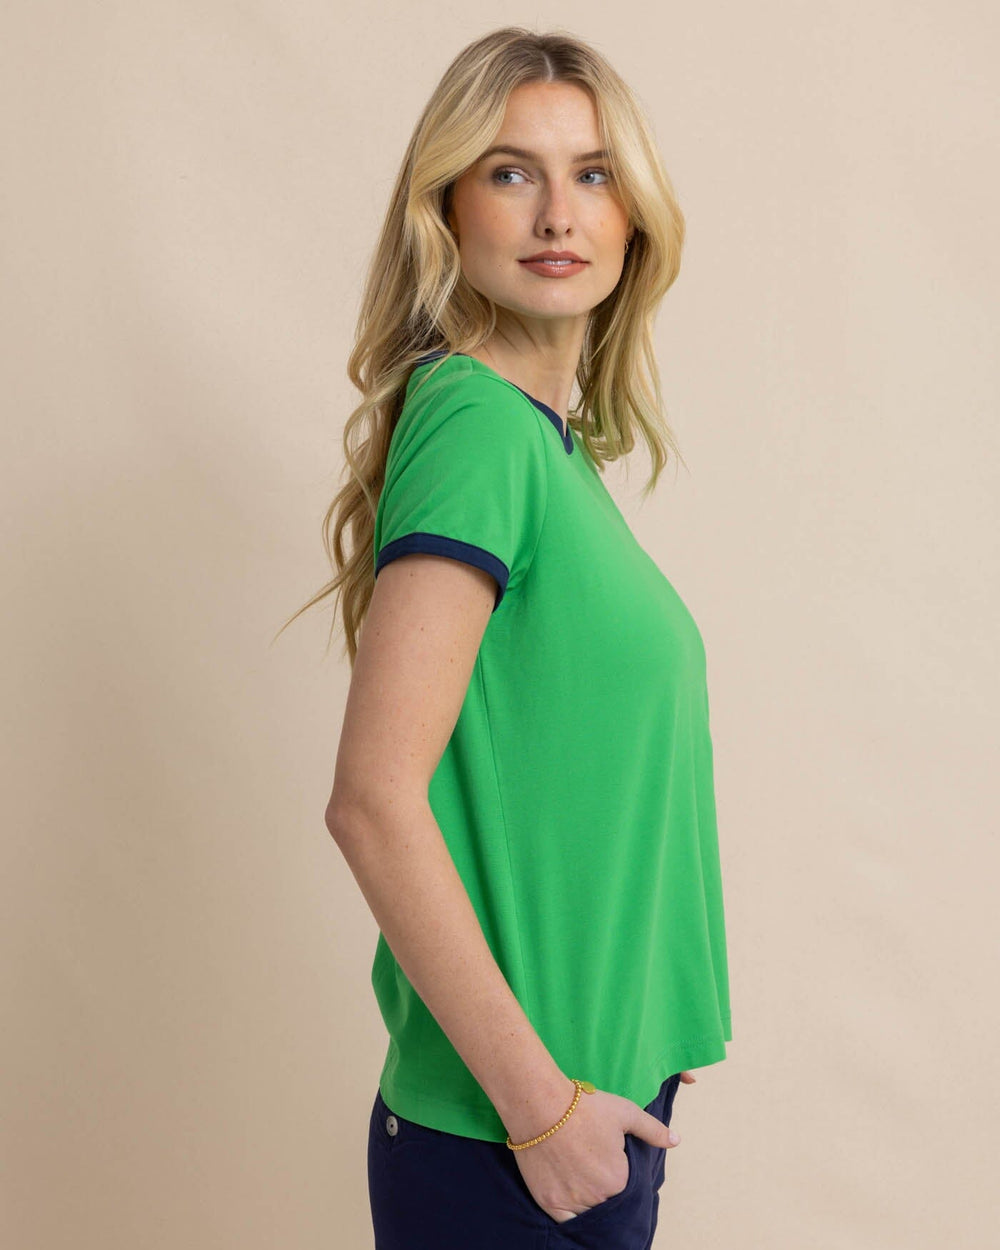 The front view of the Reece Baby Pique Top by Southern Tide - Lawn Green